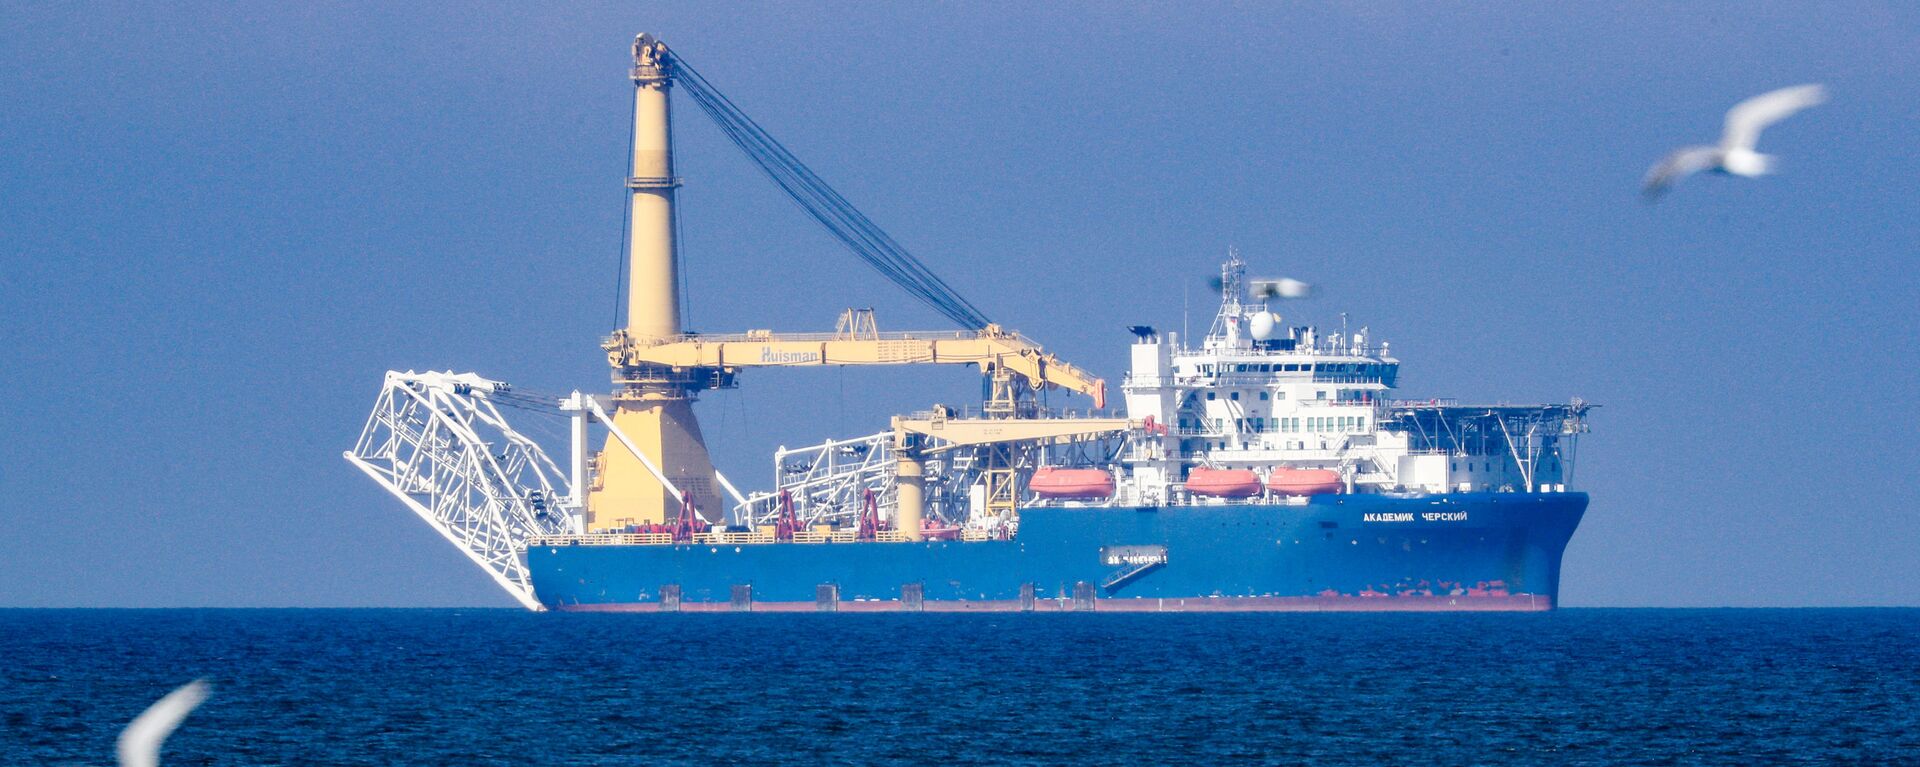 The Russian pipe-laying vessel Akademik Cherskiy is pictured in the waters of Kaliningrad, Russia. The Akademik Cherskiy is capable of completing the construction of the Nord Stream 2 gas pipeline. - Sputnik International, 1920, 27.04.2021